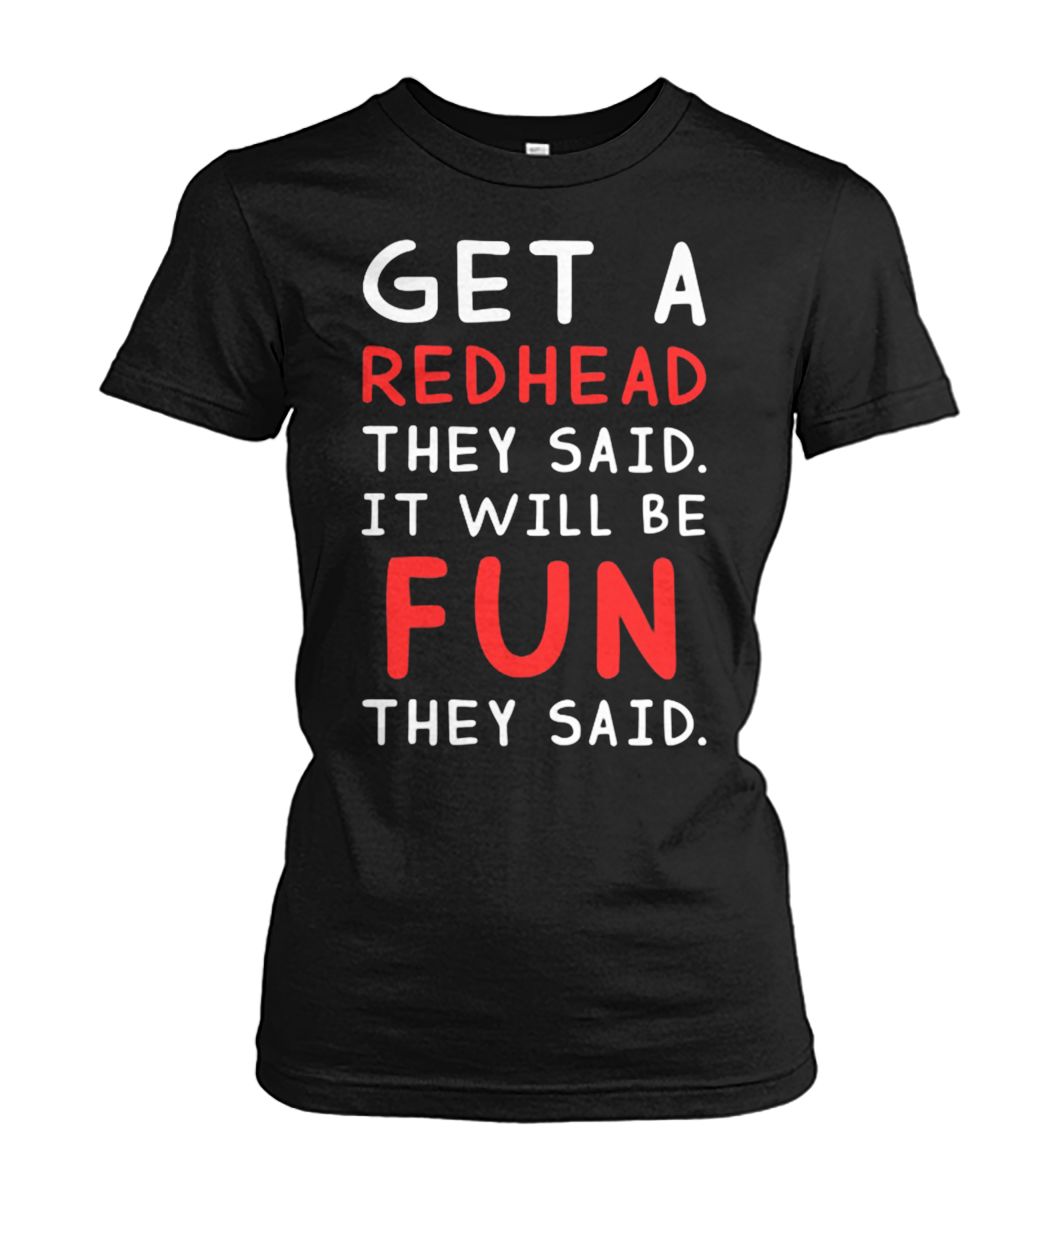 Get a redhead they said it will be fun they said women's crew tee